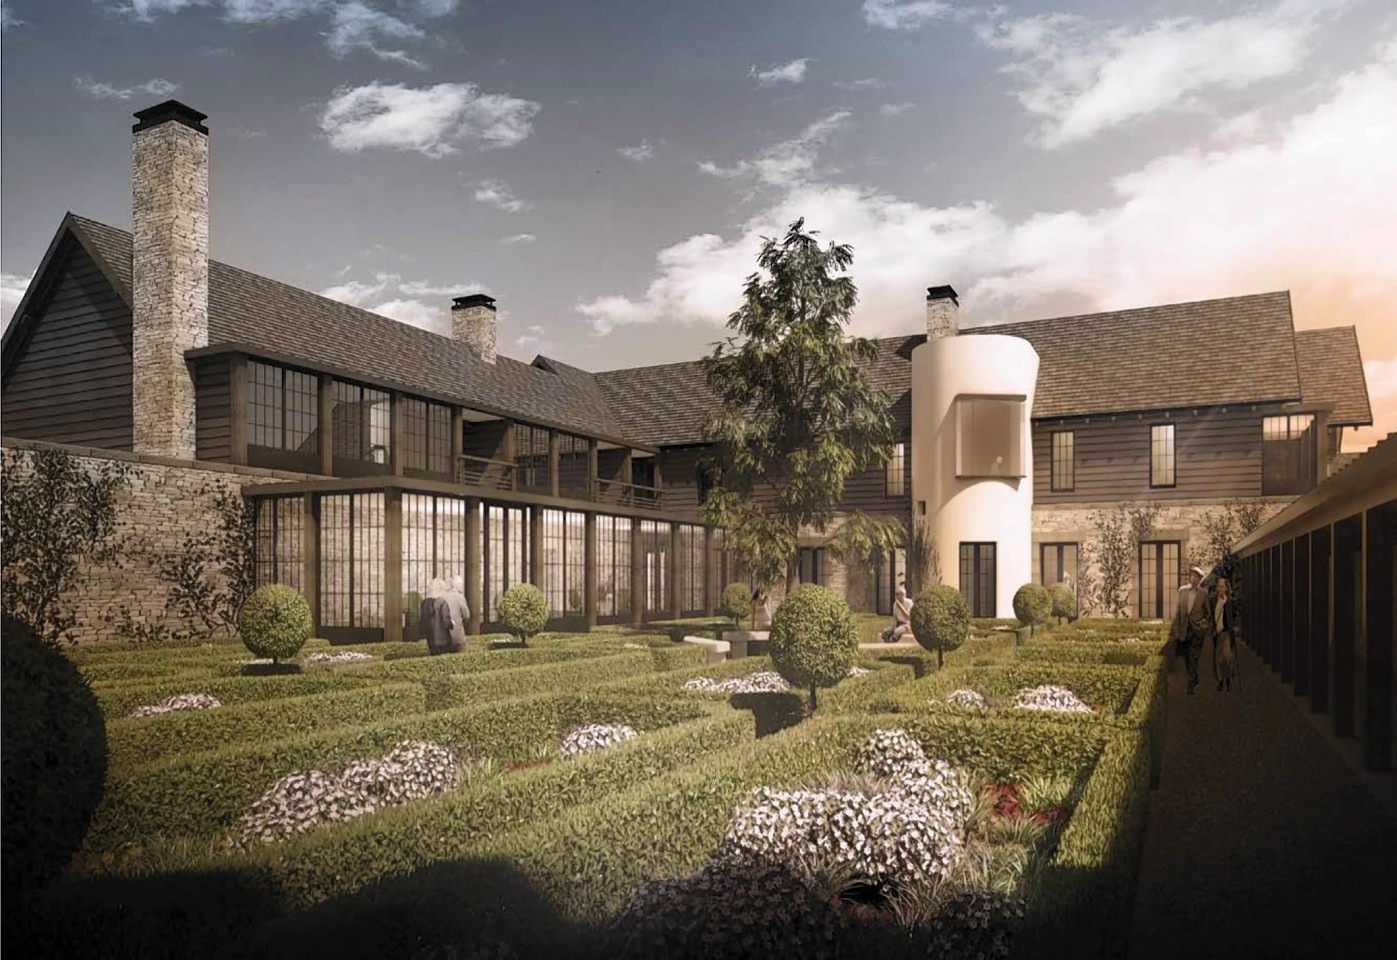 Artist impression of housing planned for the Inchmarlo development